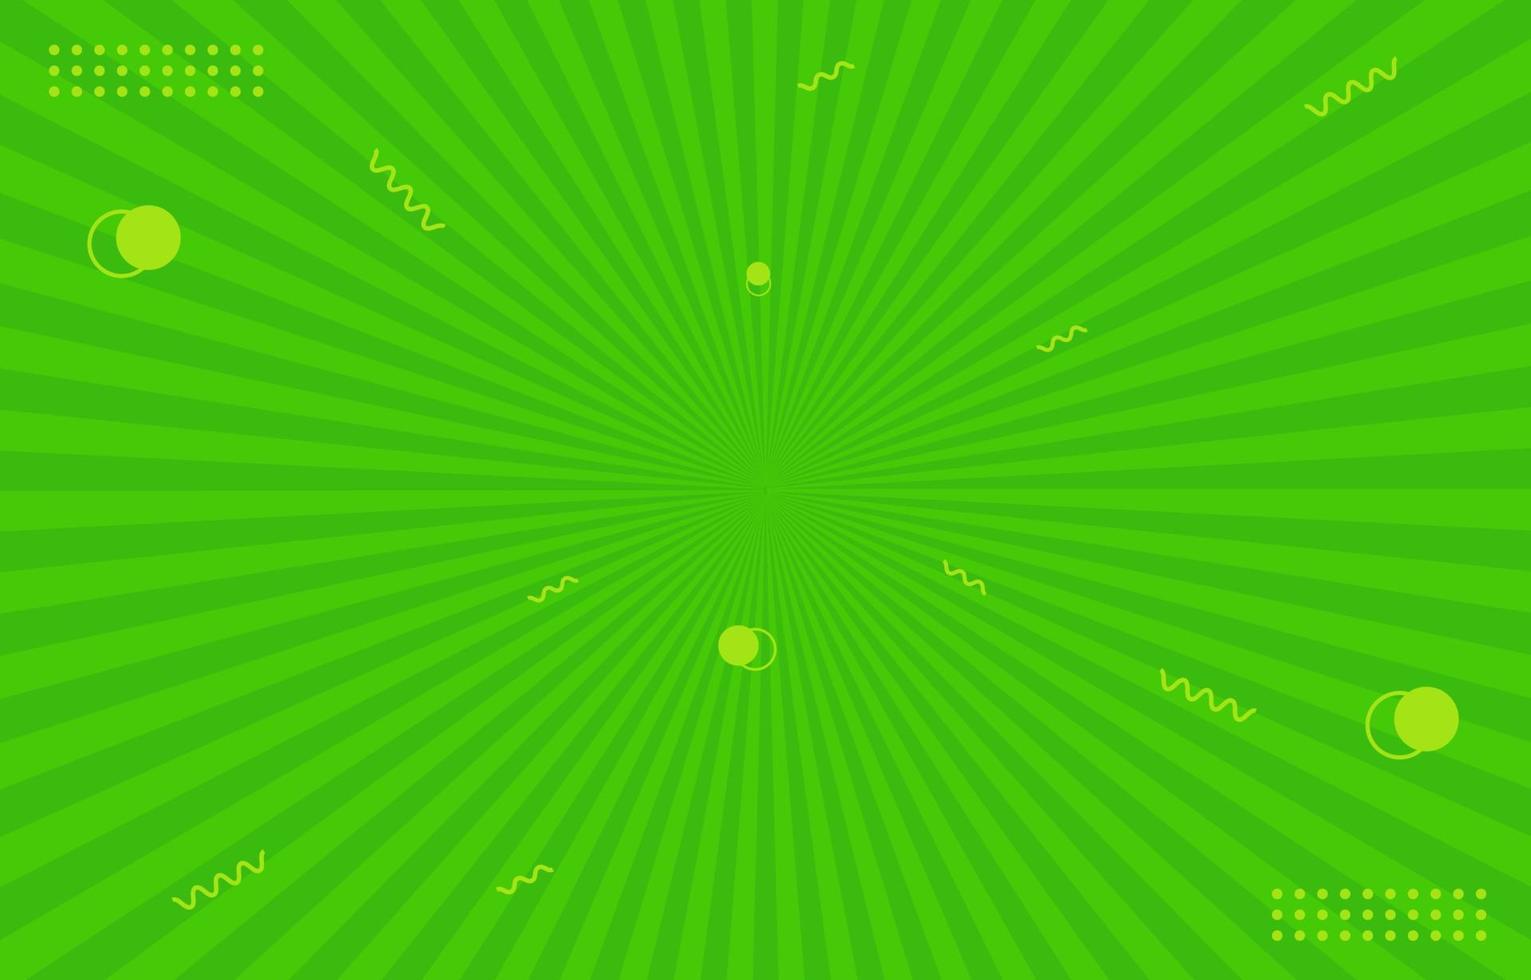 Abstract green sunburst background with geometric dynamic shapes vector